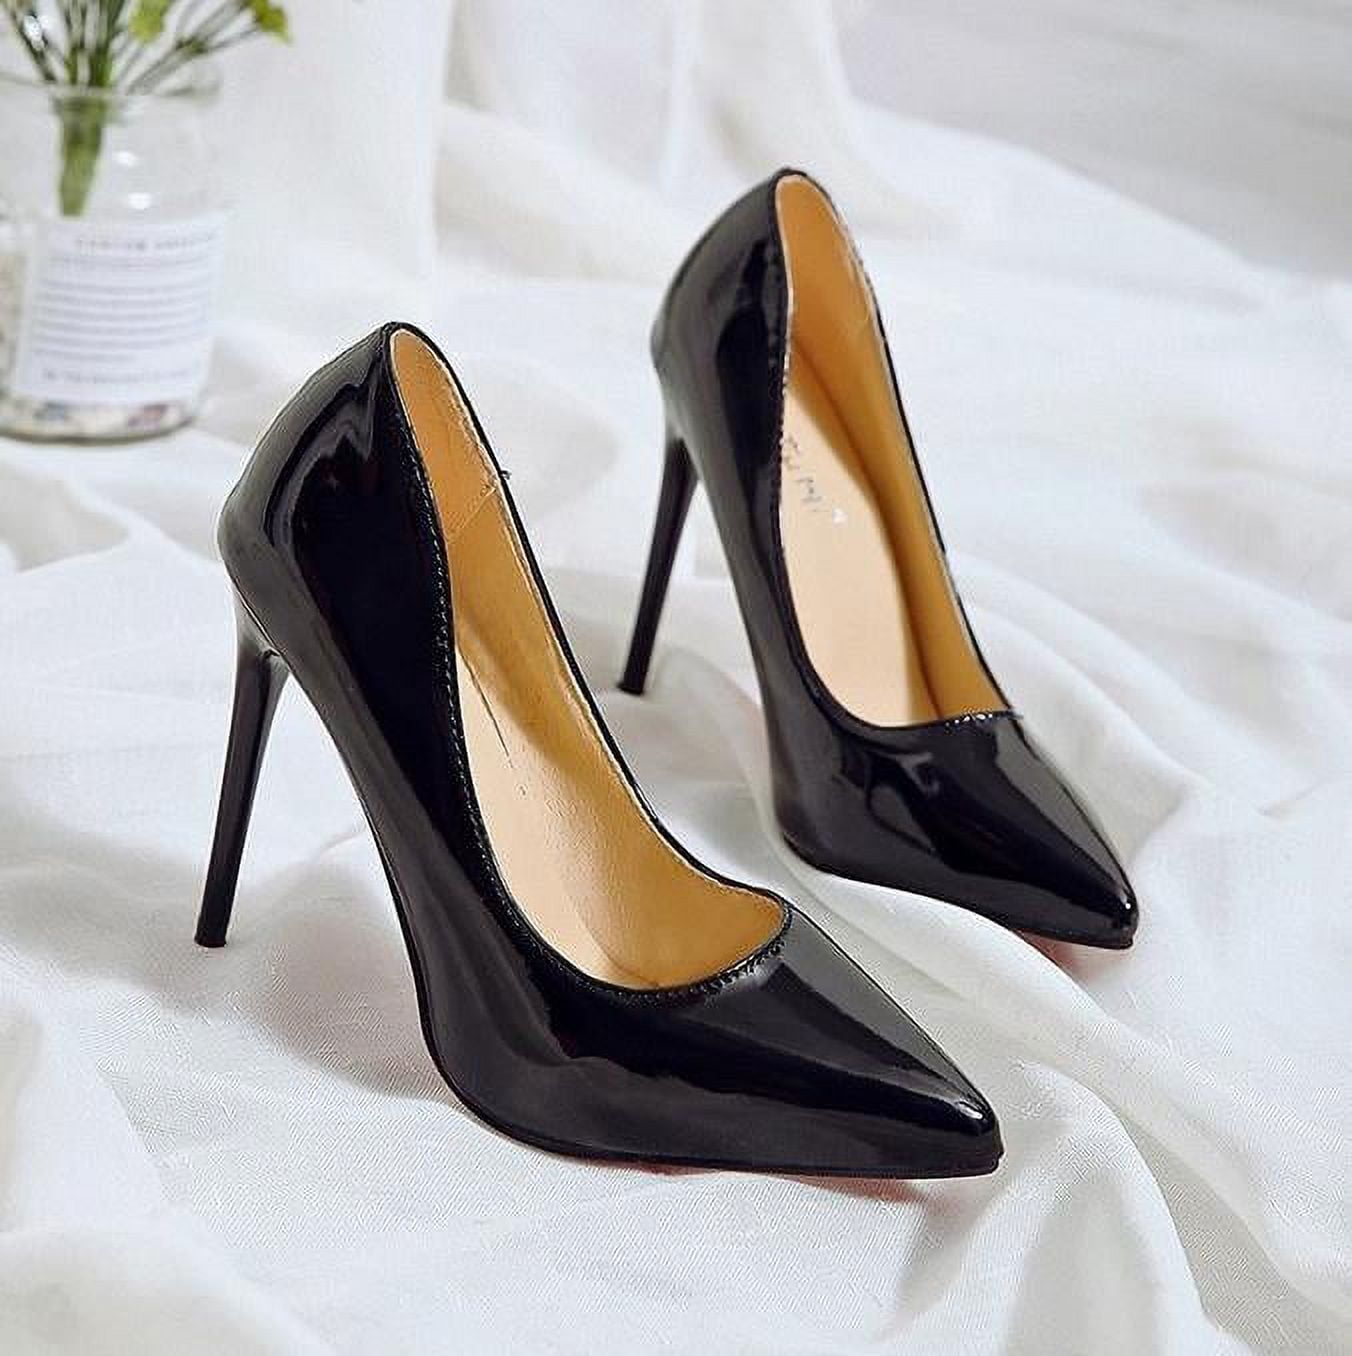 Peach Shoes Formal - Buy Peach Shoes Formal online in India